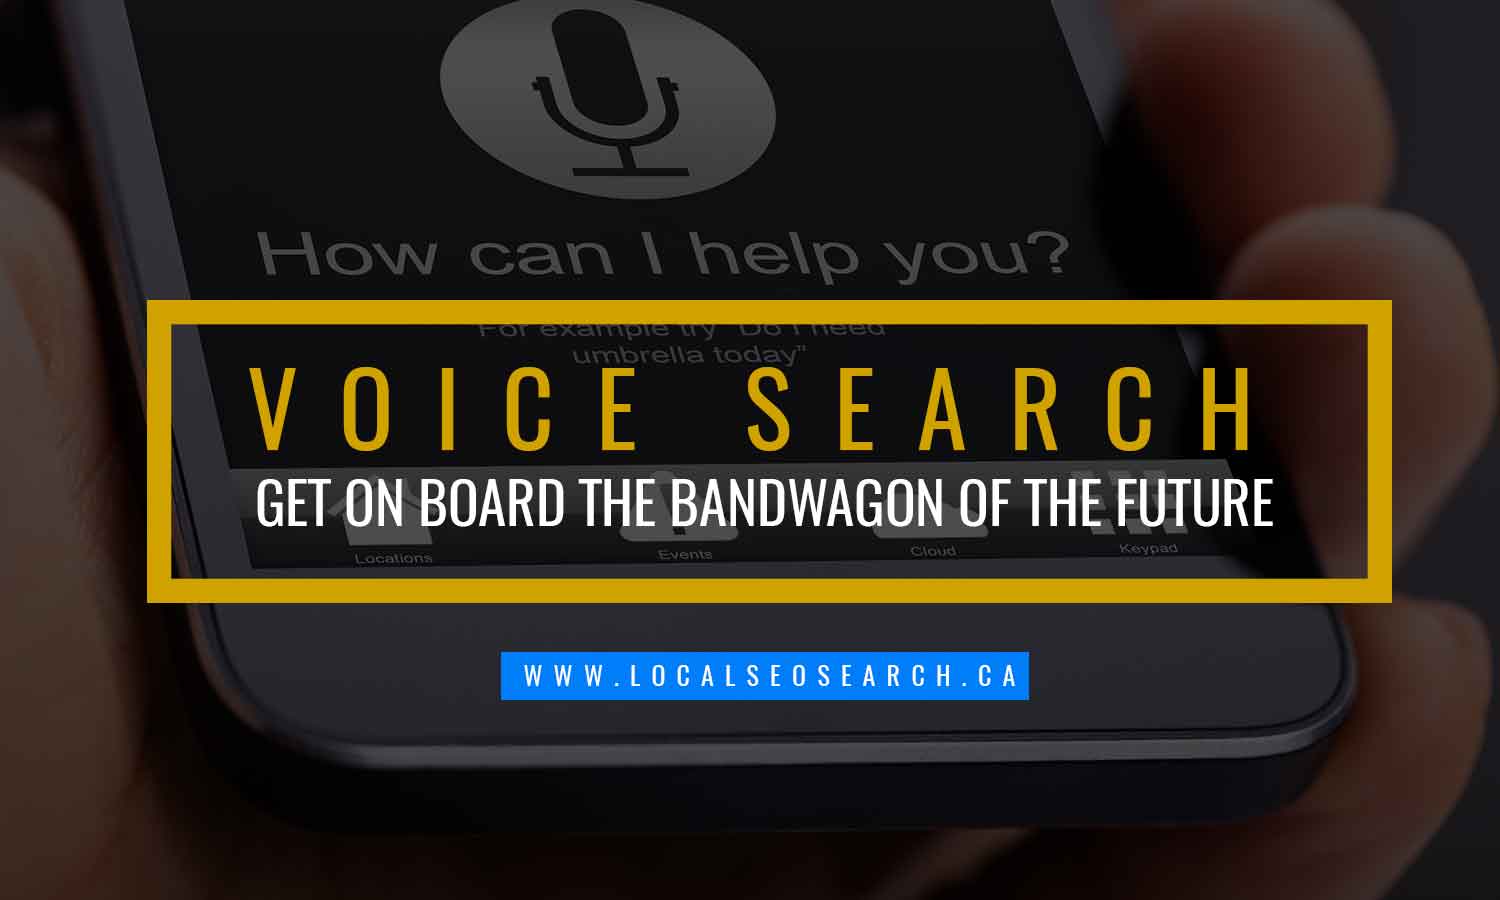 Voice search -- get on board the bandwagon of the future